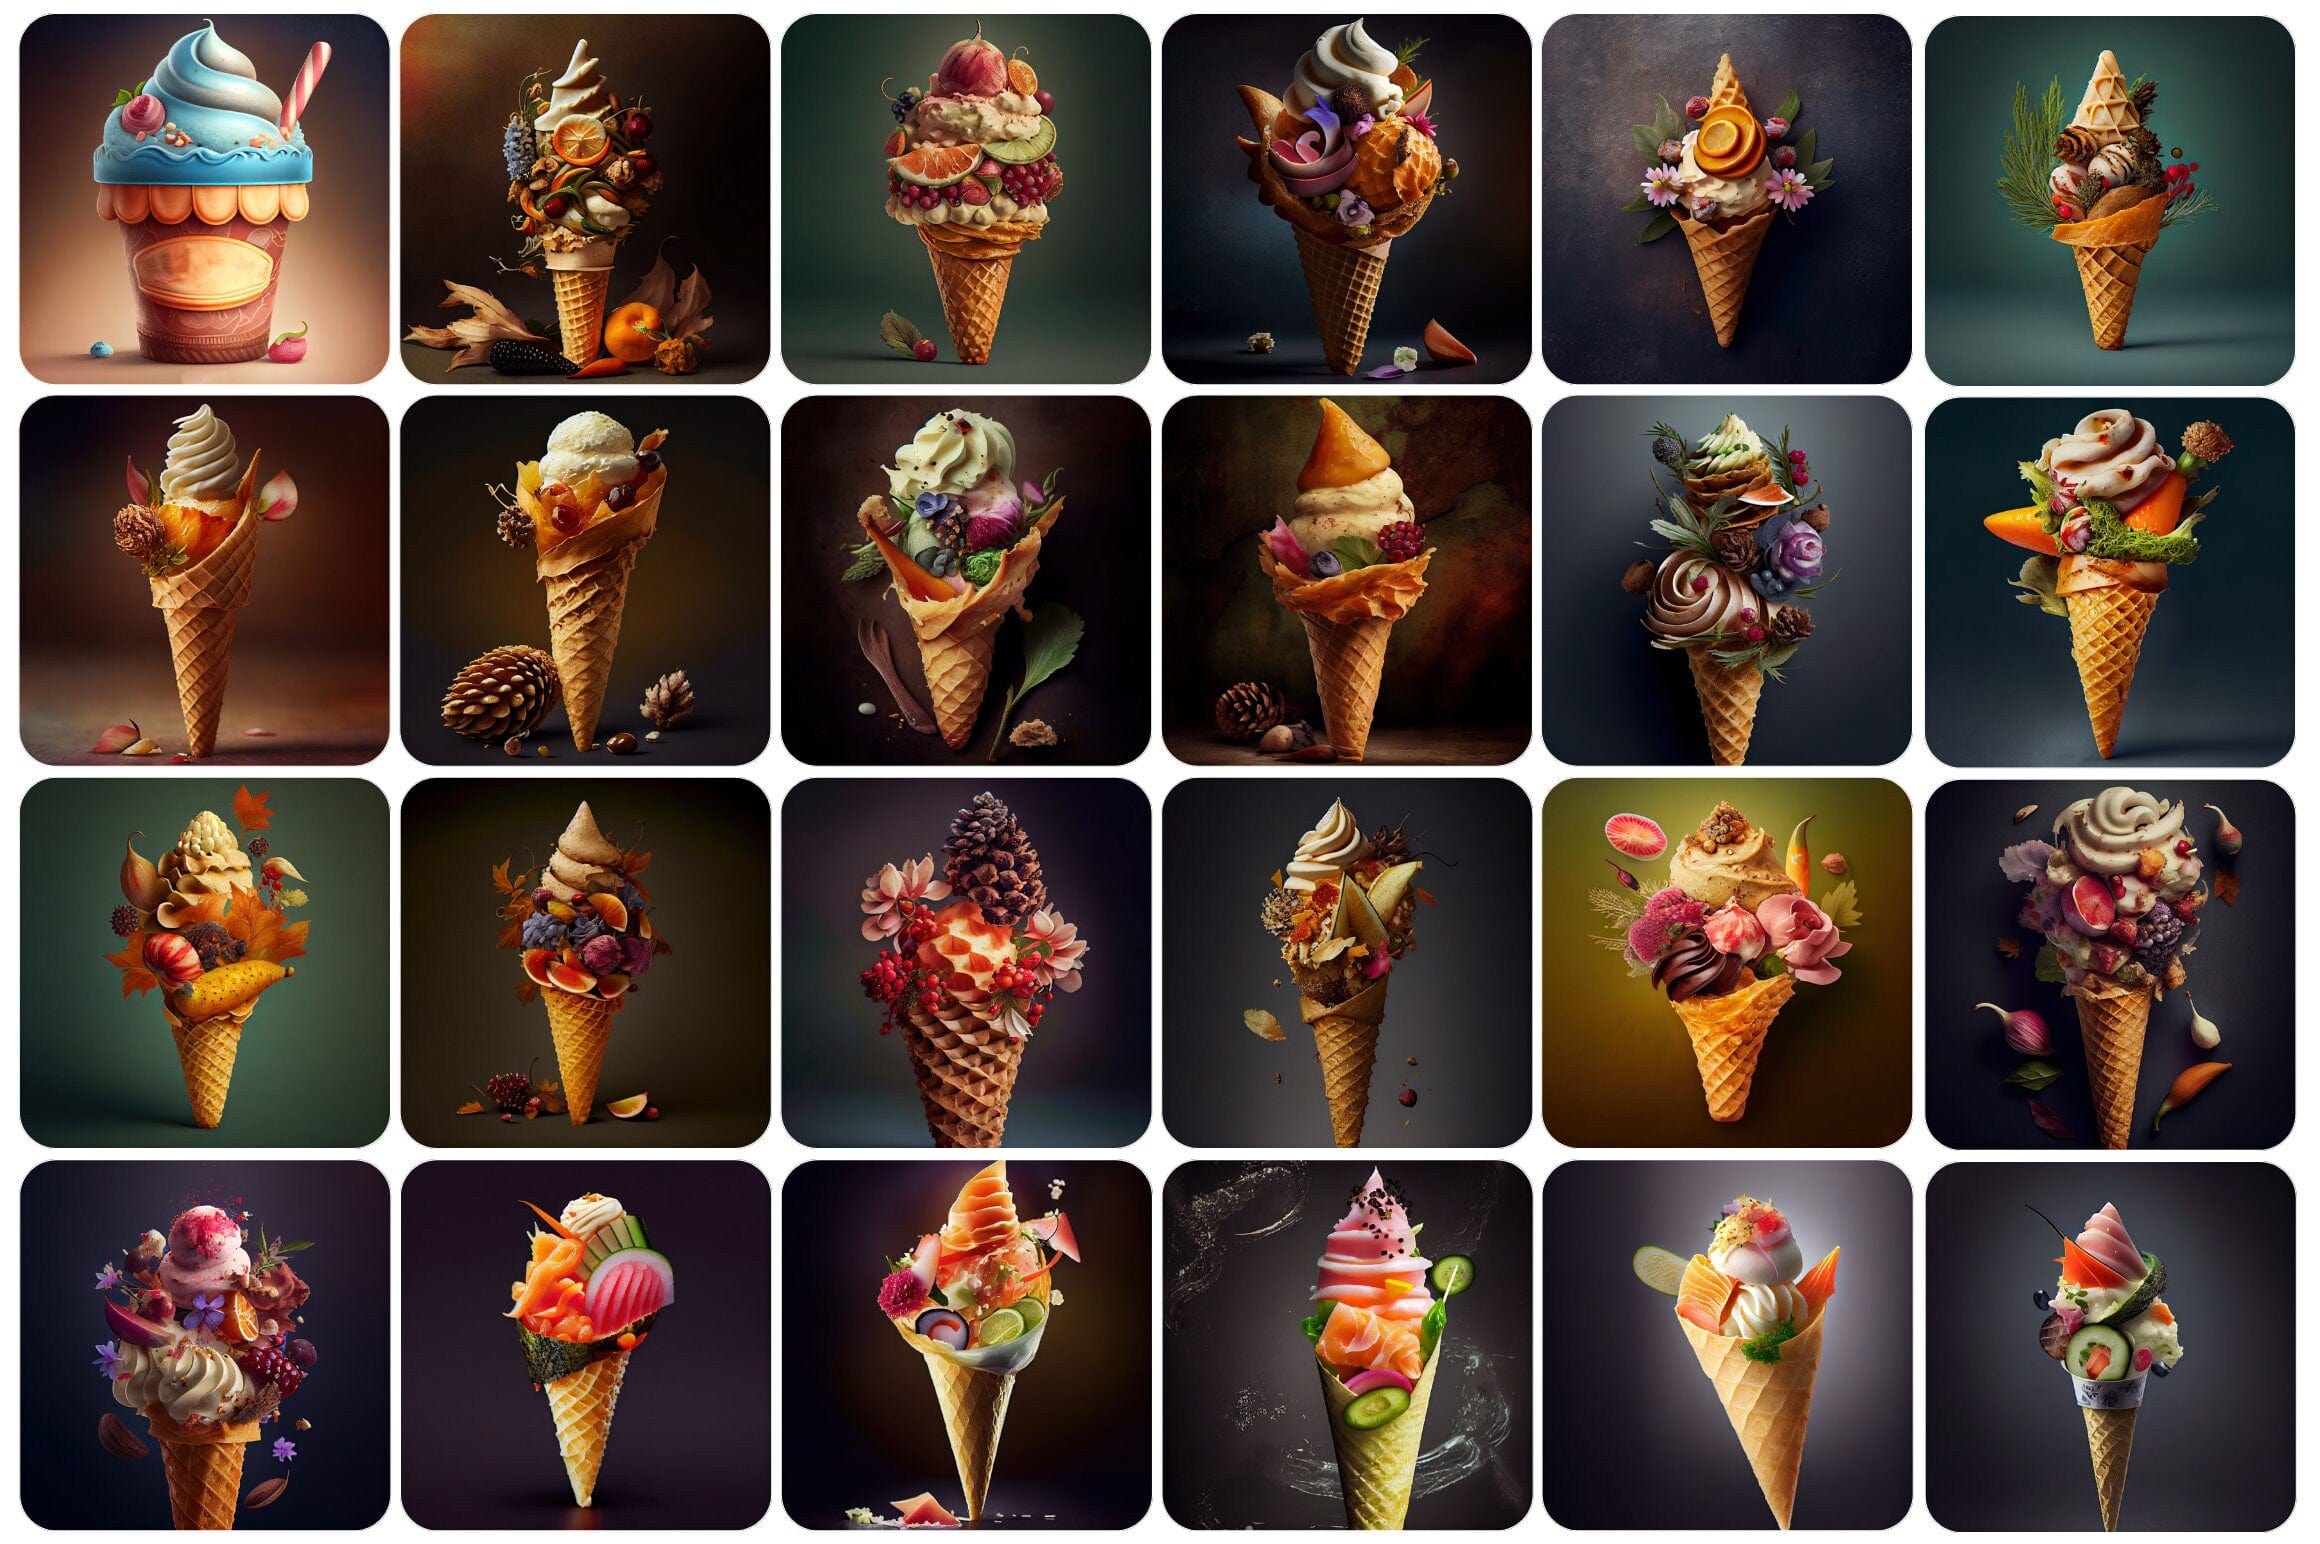 200+ Decadent Ice Cream & Cookie Images - Perfect for Sweet Treat Themed Projects - Commercial License Digital Download Sumobundle